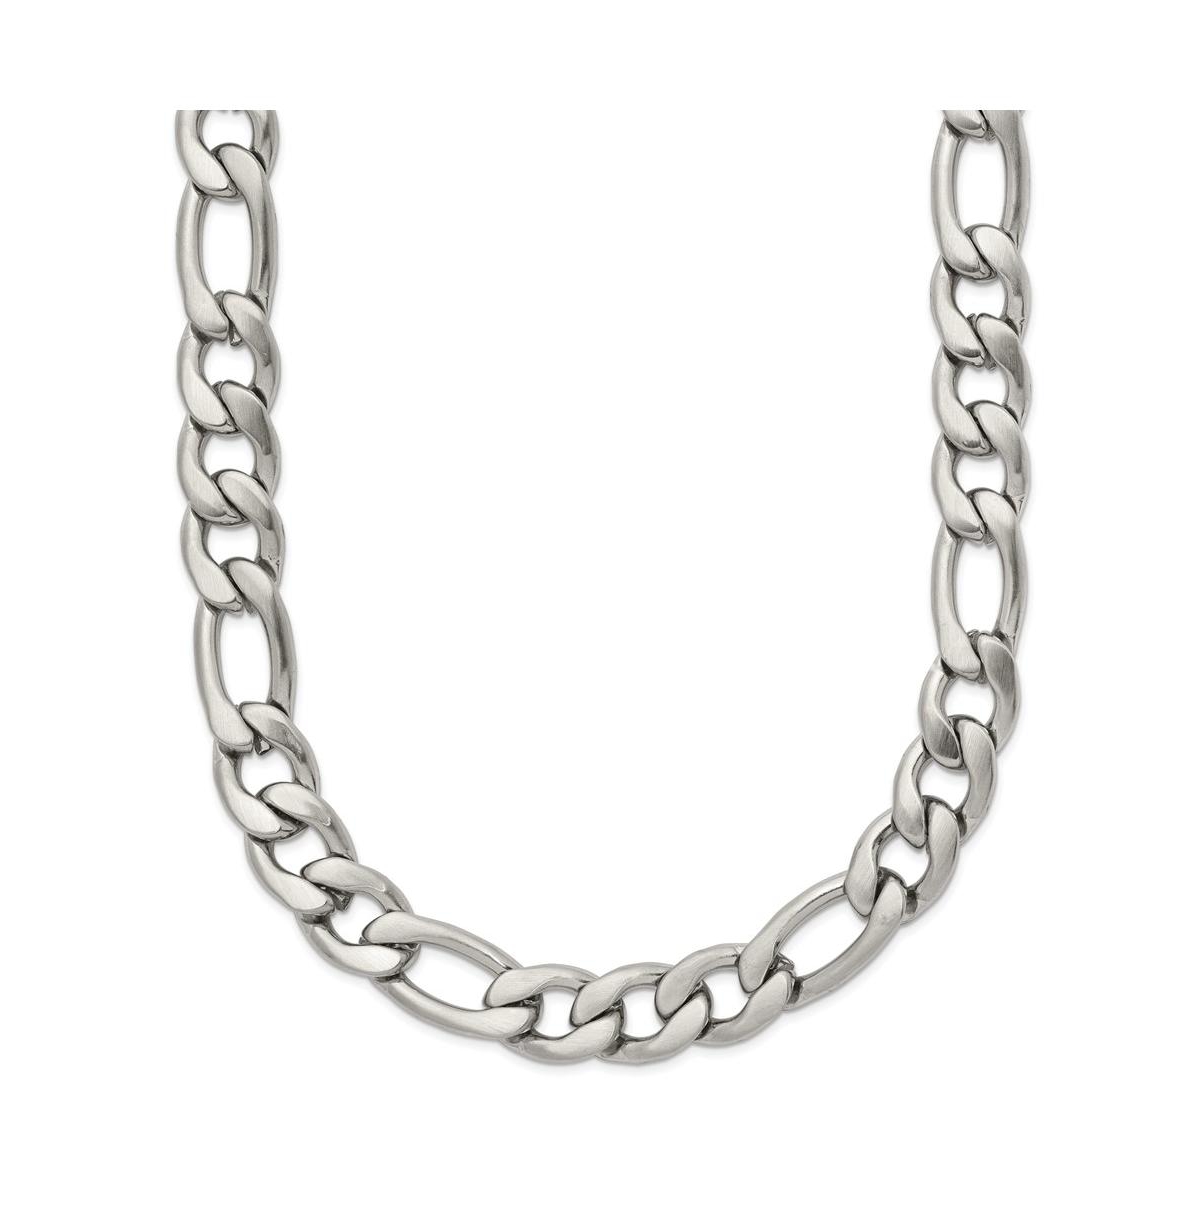 Stainless Steel Satin 7mm 18 inch Figaro Chain Necklace - Silver